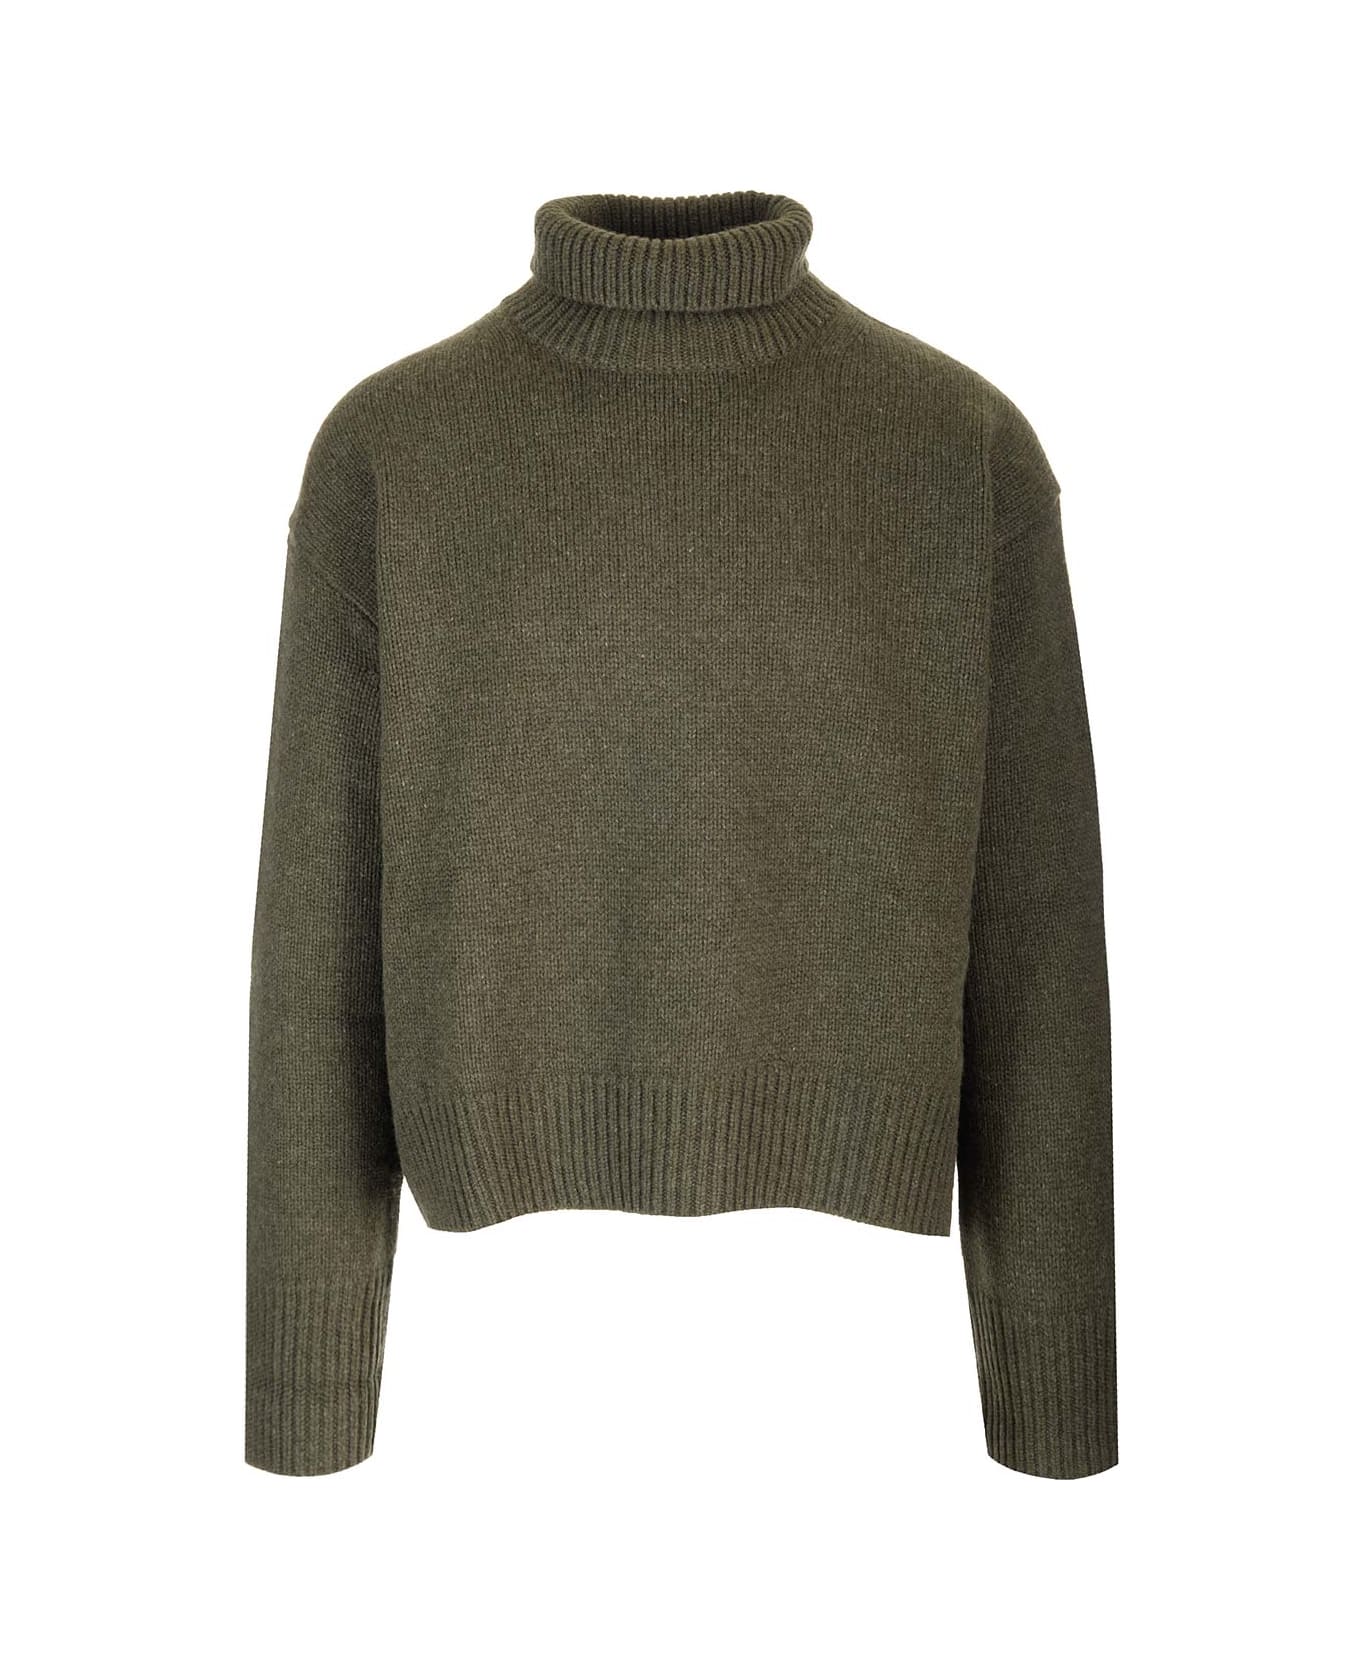 Givenchy Cachemire Turtleneck - Green